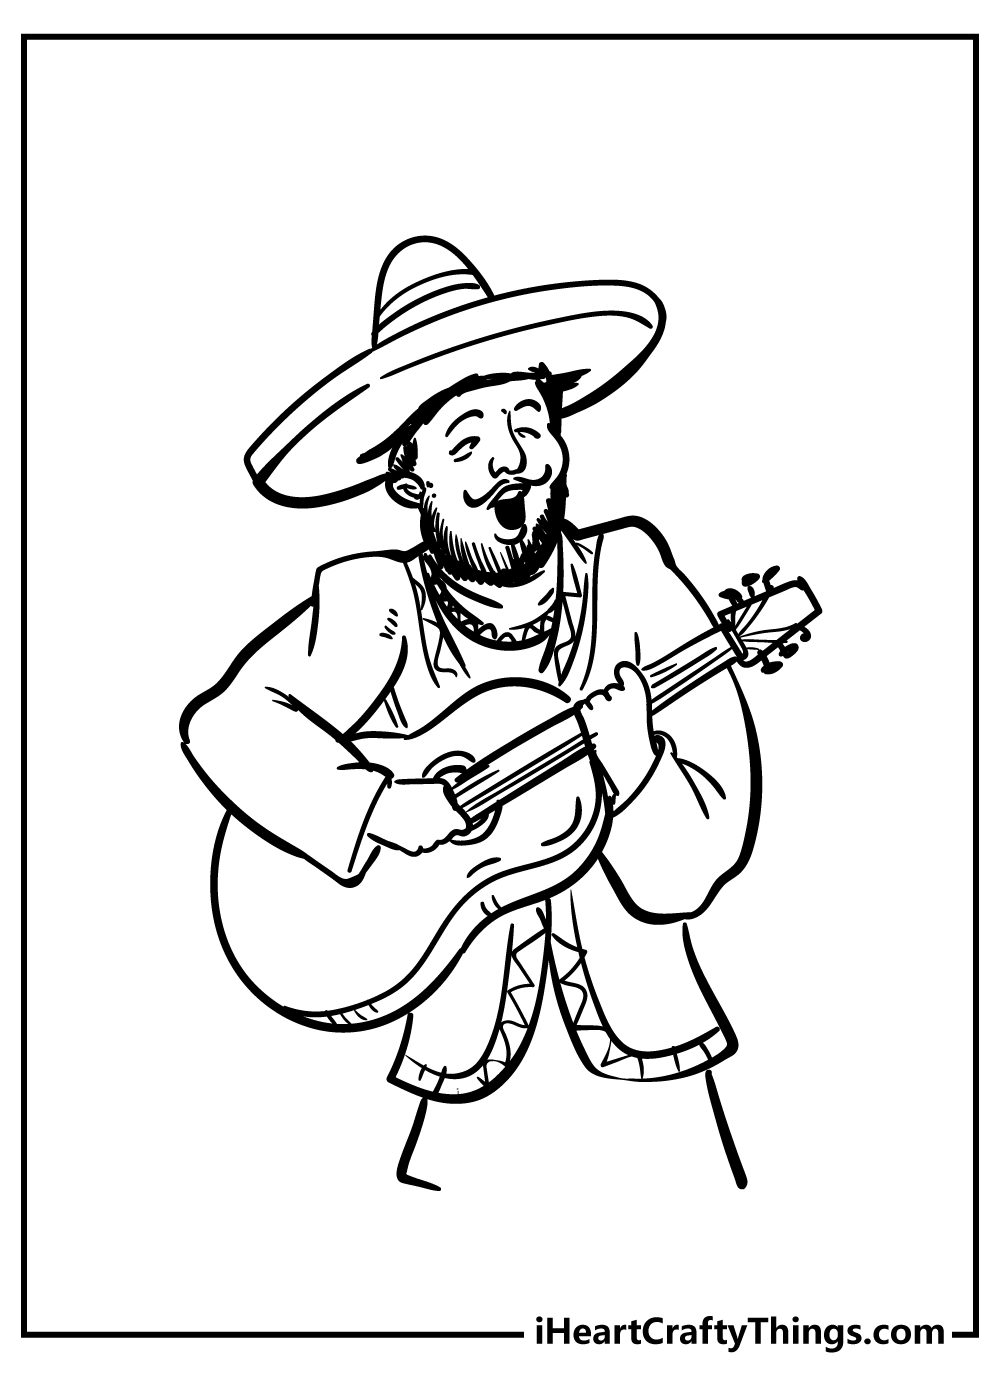 Mexican Coloring Sheet for children free download